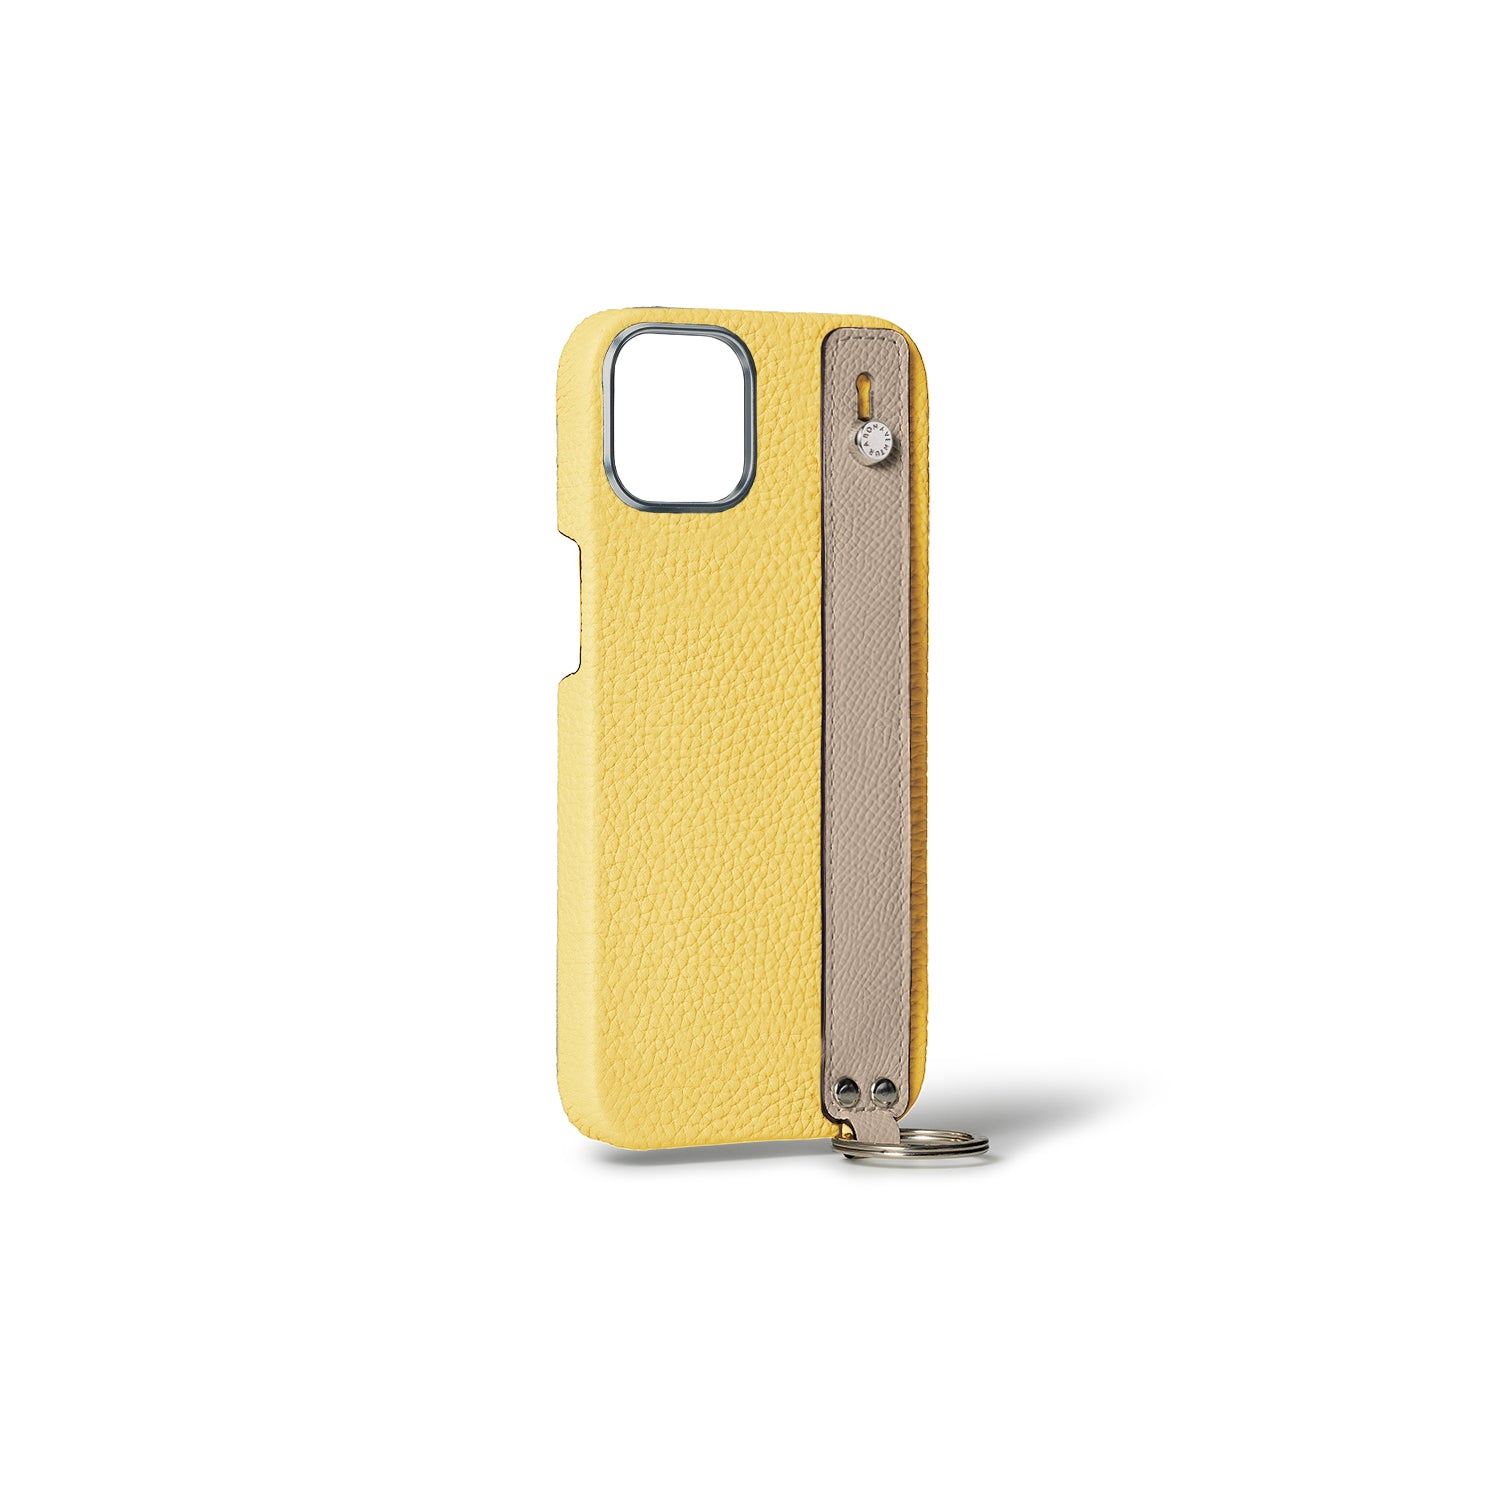 (iPhone 15) Back cover case with handle, shrink leather